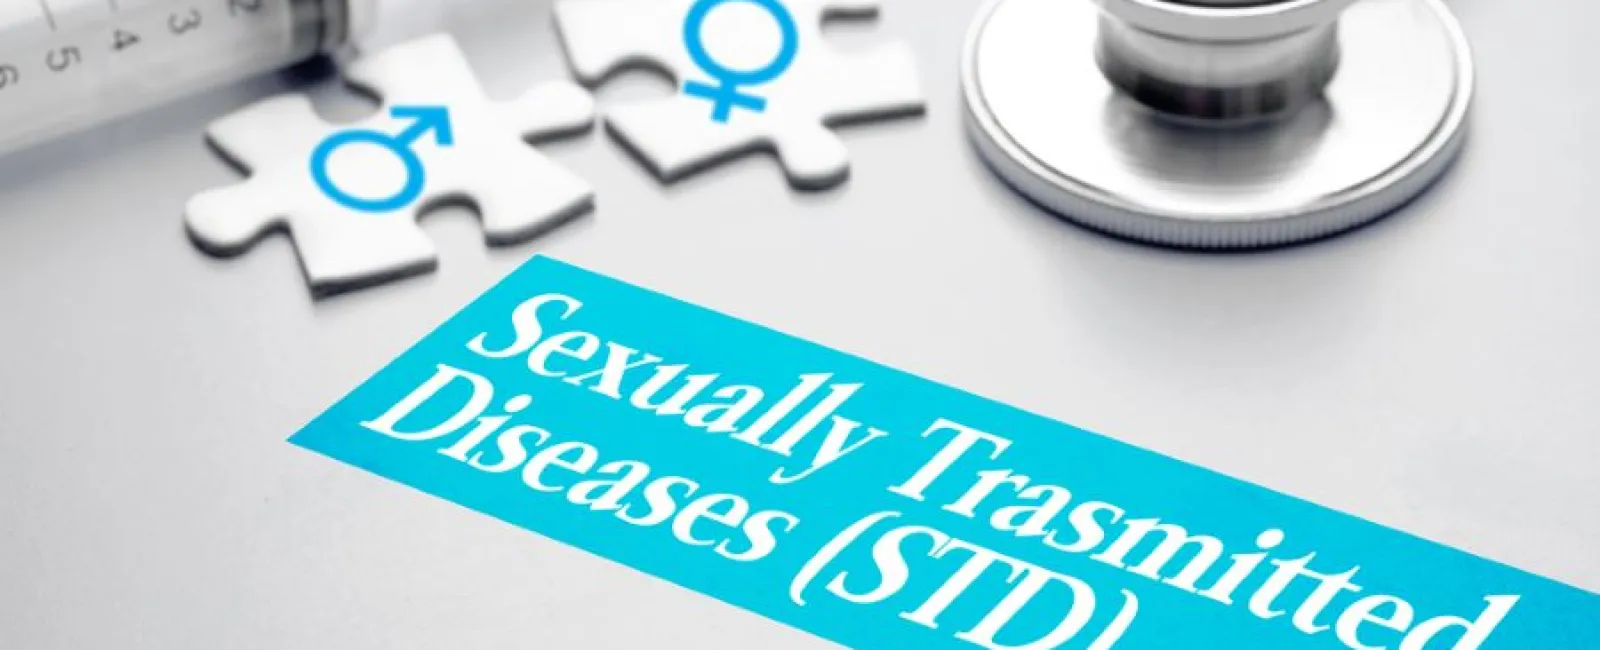 Did You Know April is National STD Awareness Month?